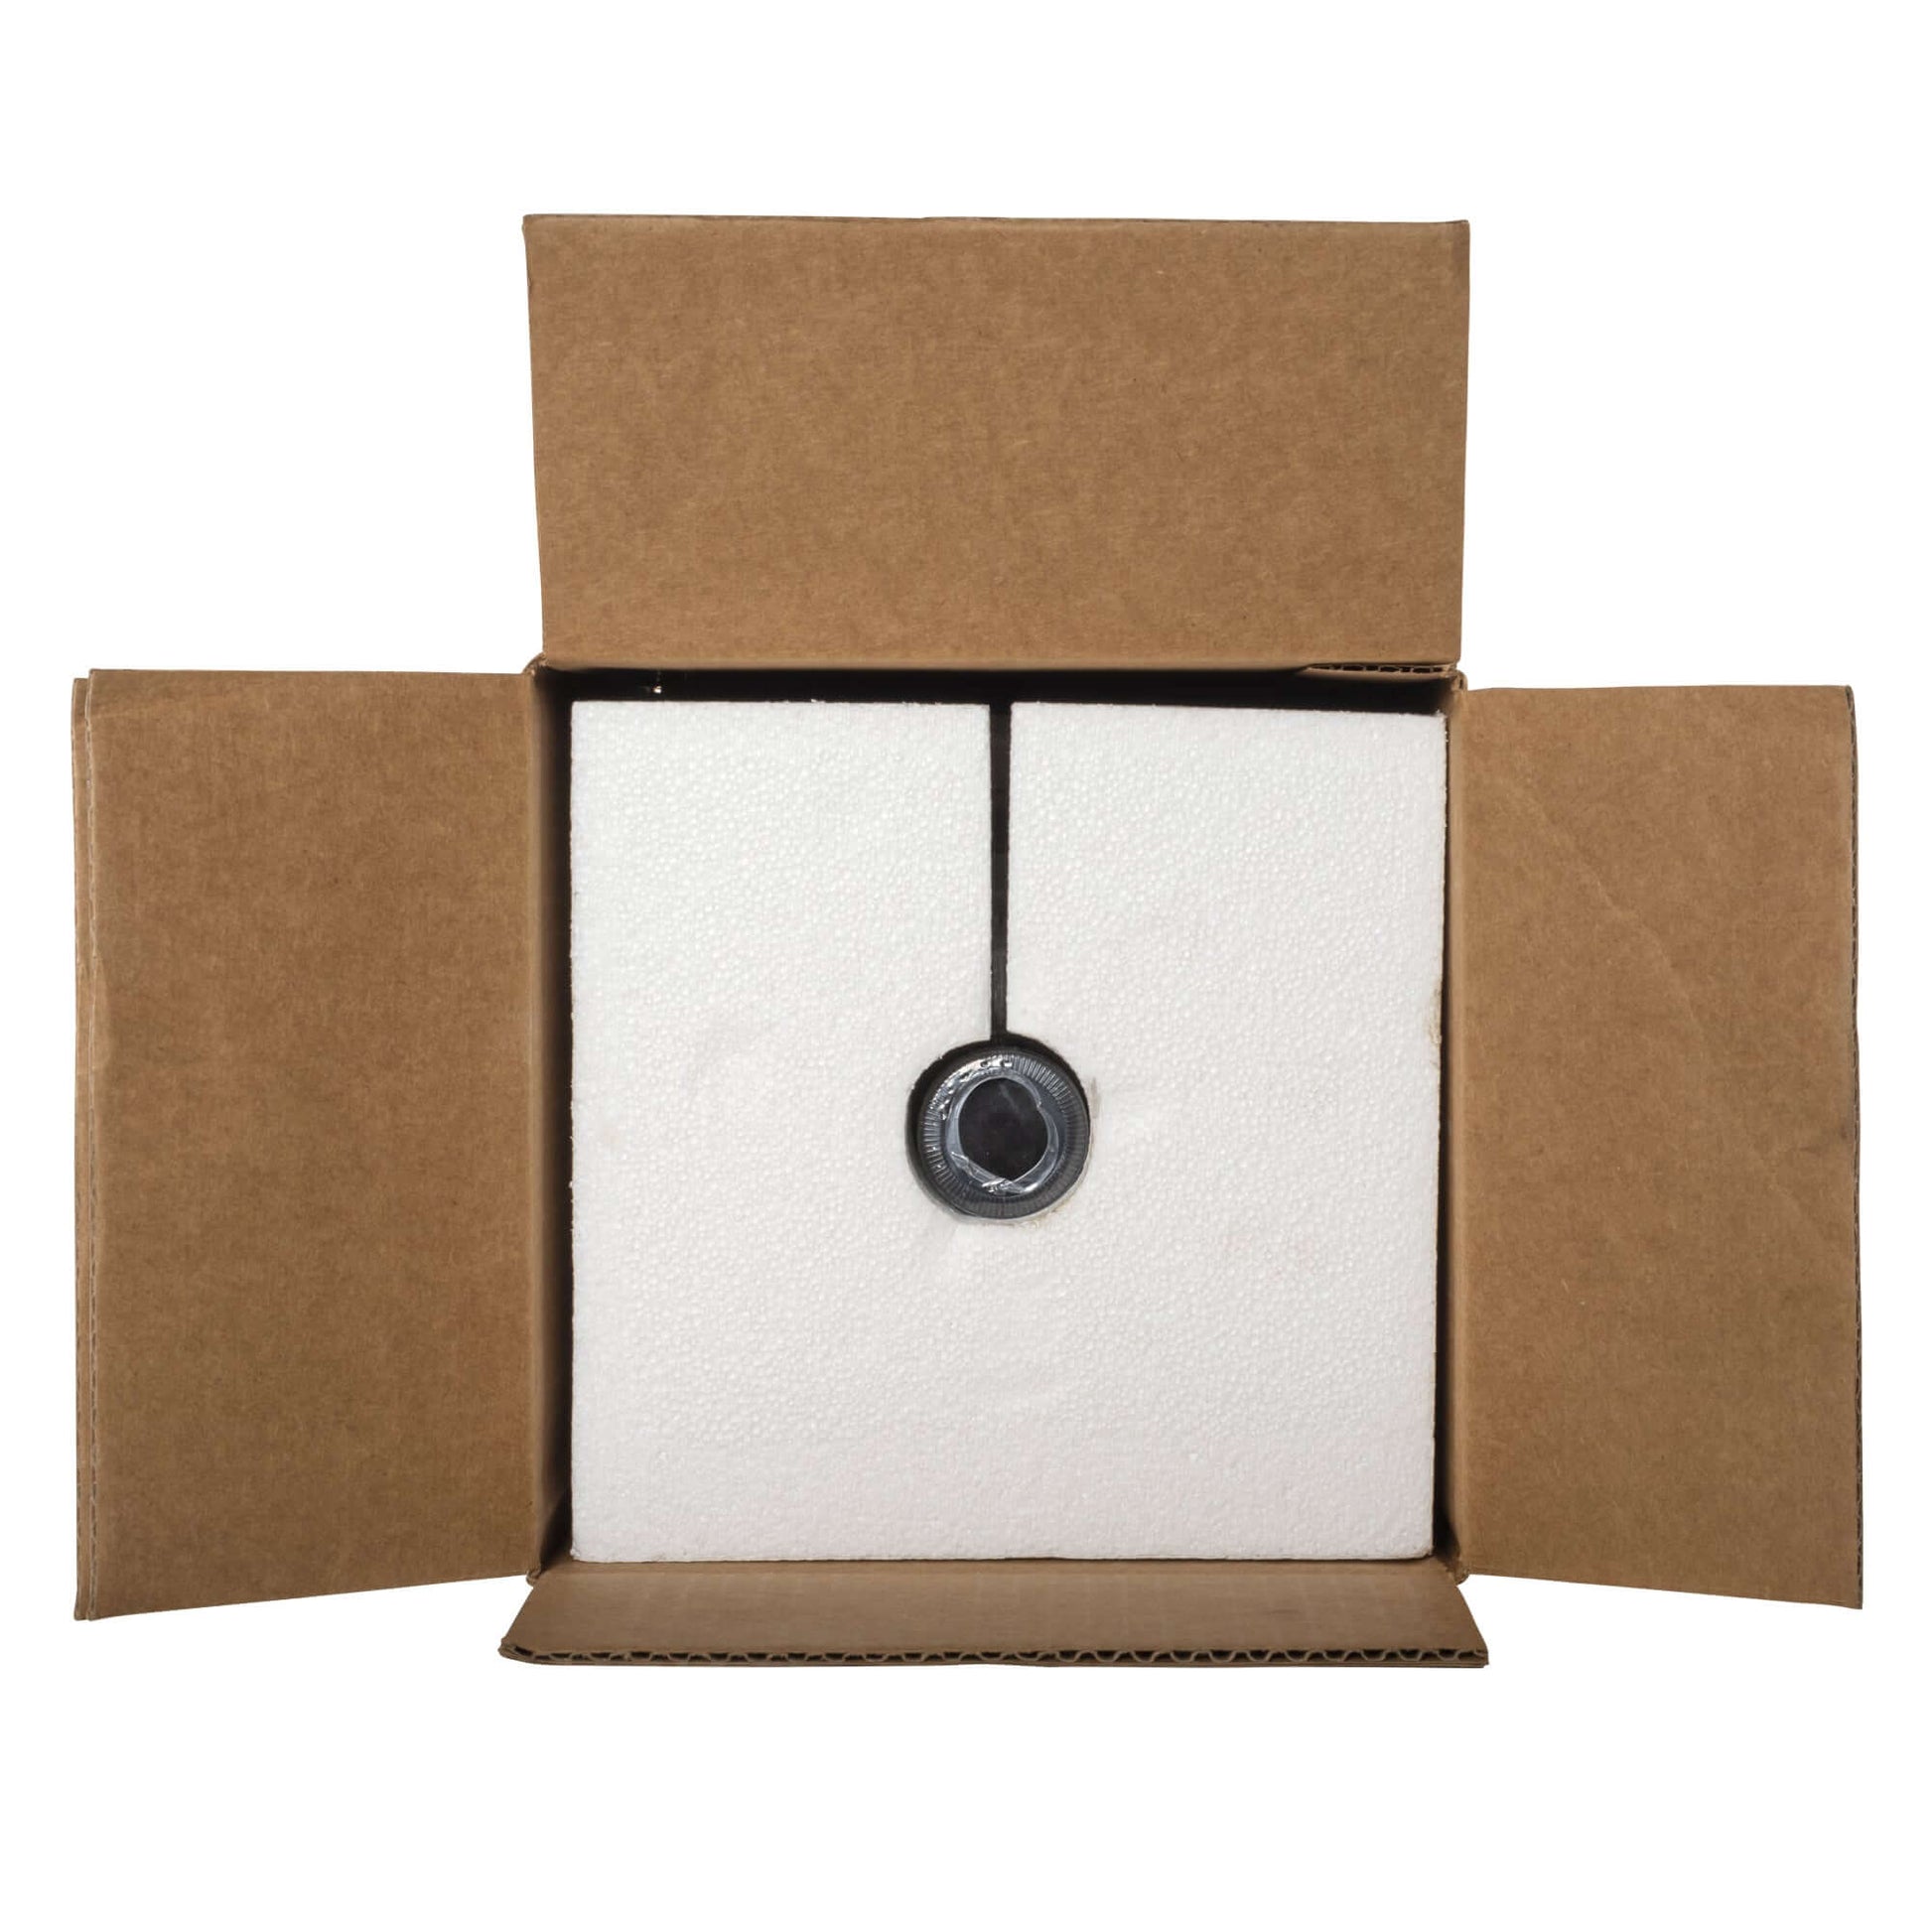 DMSO-liquid-99.995-gallon-packaging-arthritis-relief-1-dimethyl-sulfoxide. brown box laid on it side with front open view visible. Cap is visible with foam insert surrounding it to show packaging. Flaps of box are opened to revel contents of the box.